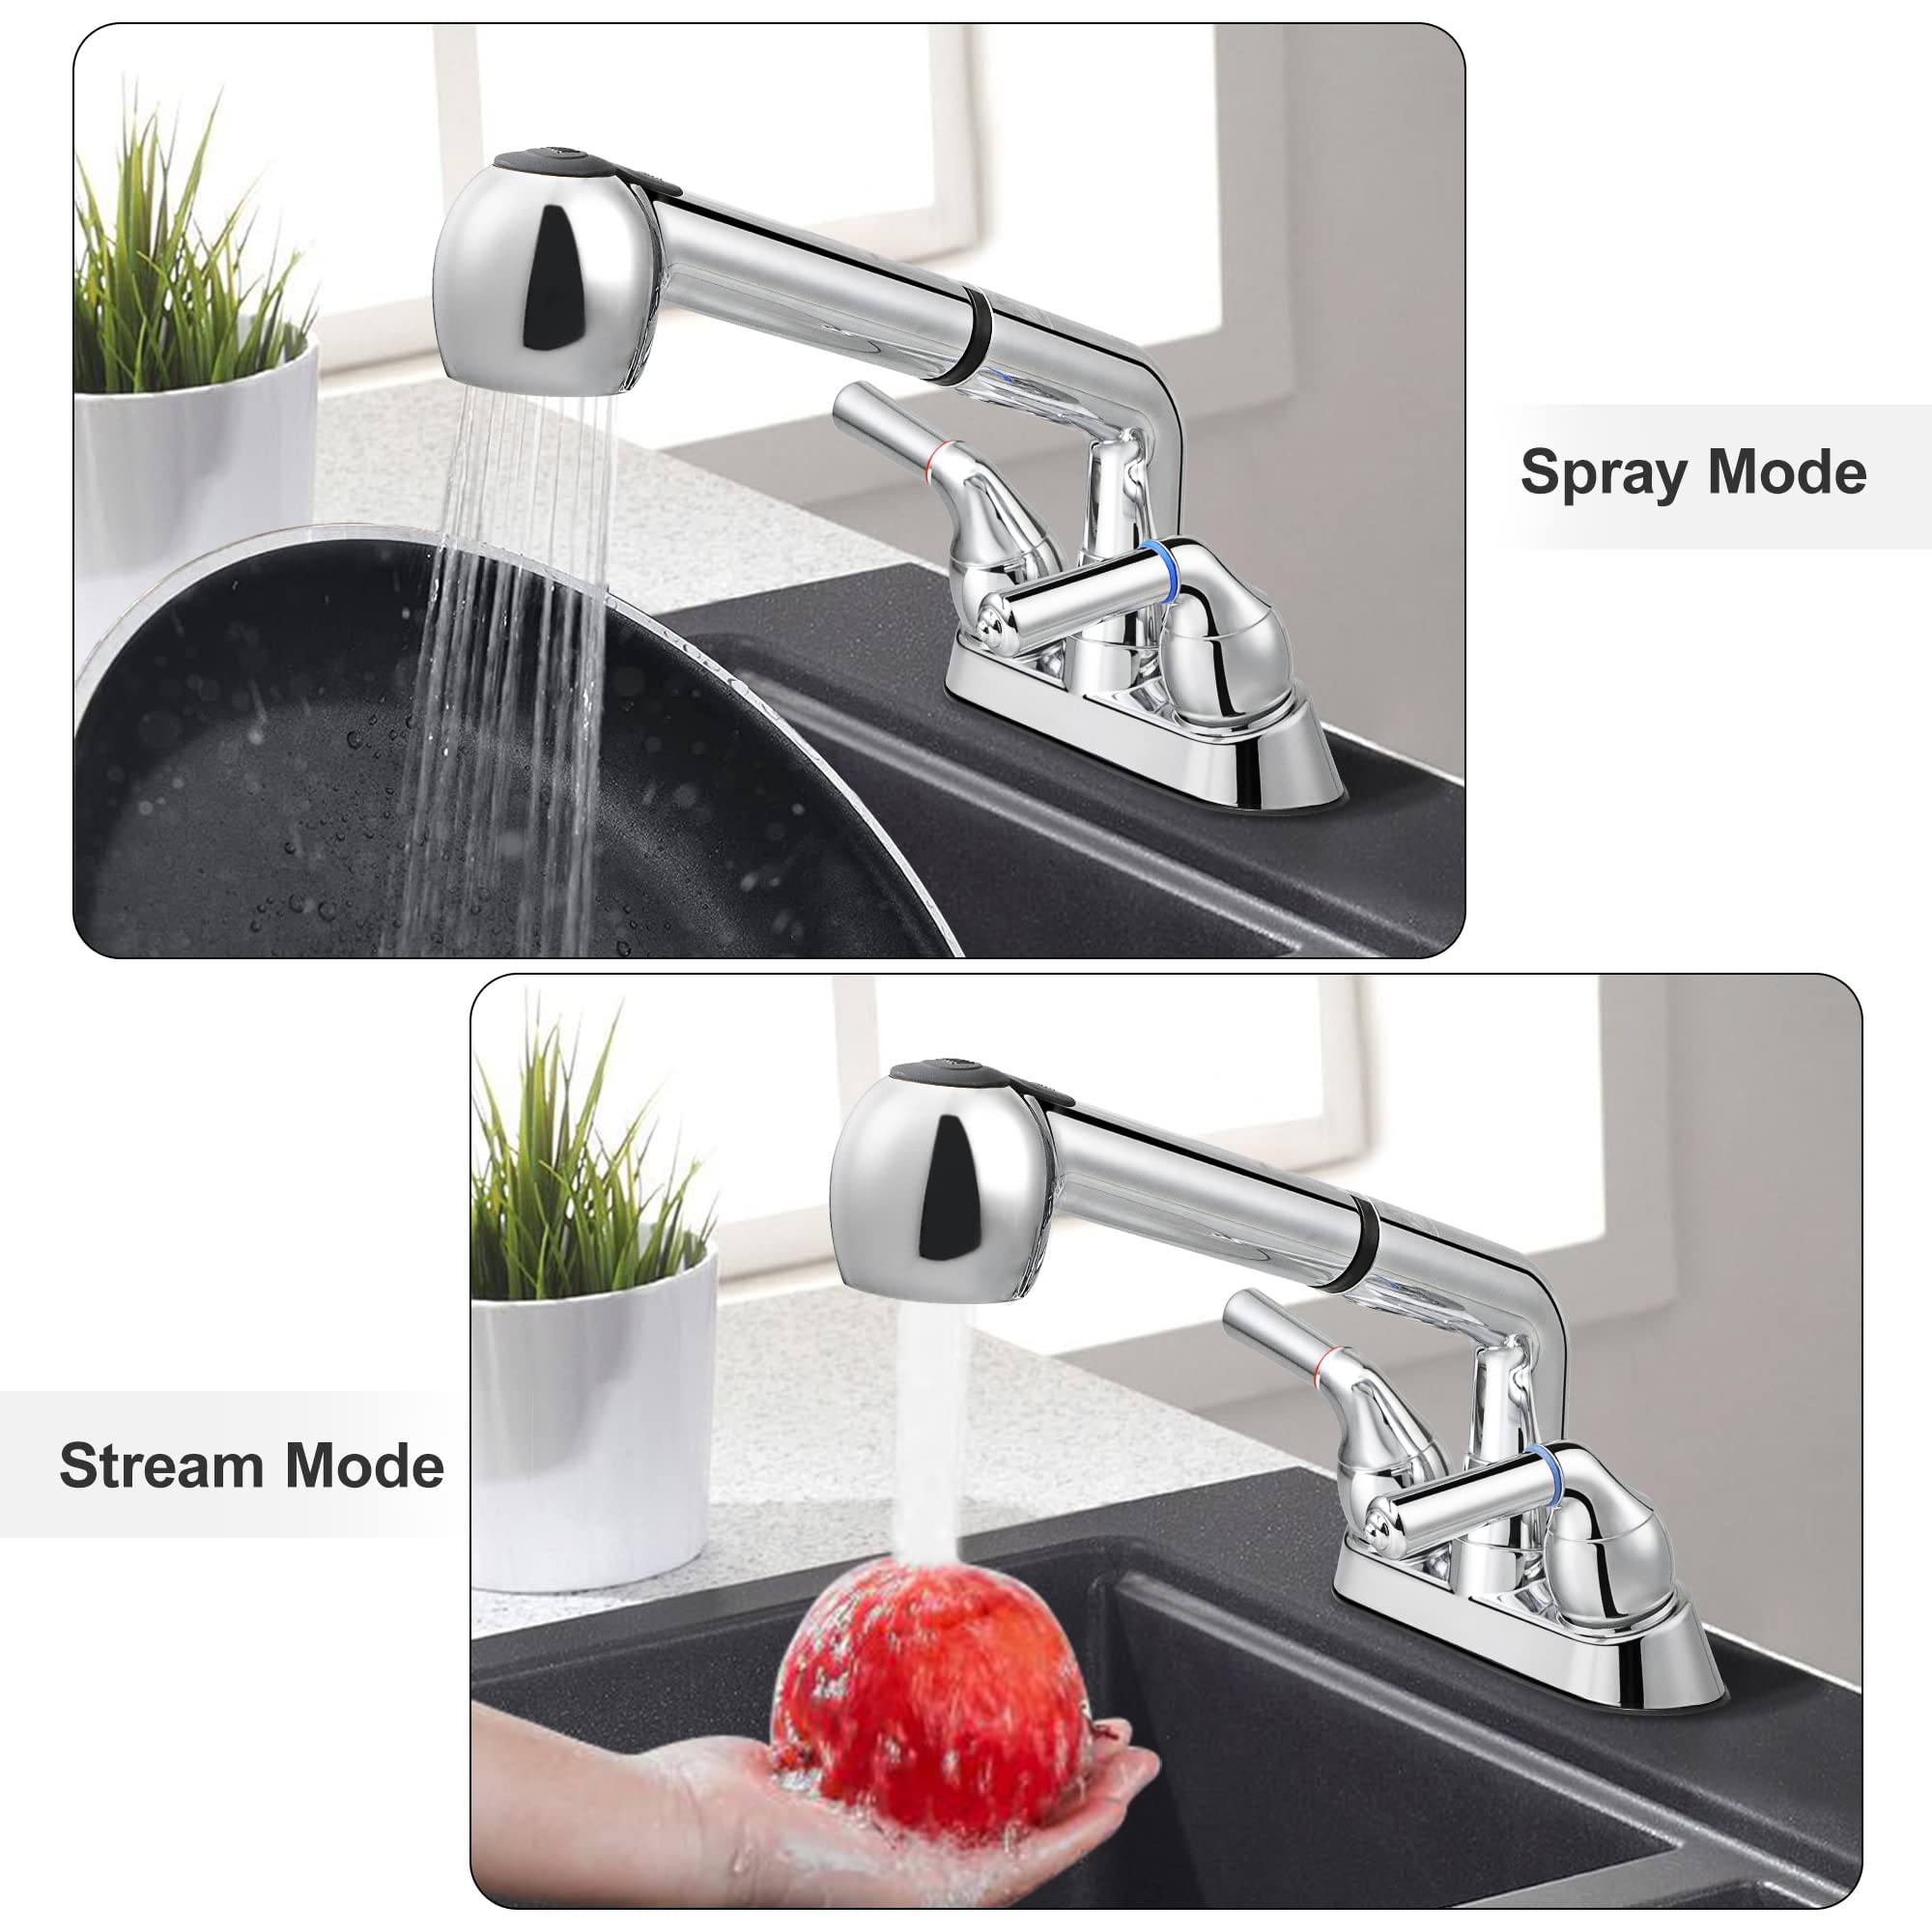 Utility Sink Faucet with Sprayer, Laundry Room Faucet with Pull Out Sprayer for Laundry Tub, 4 inch Centerset 3 Holes Installation Non-Metallic, Chrome Finish